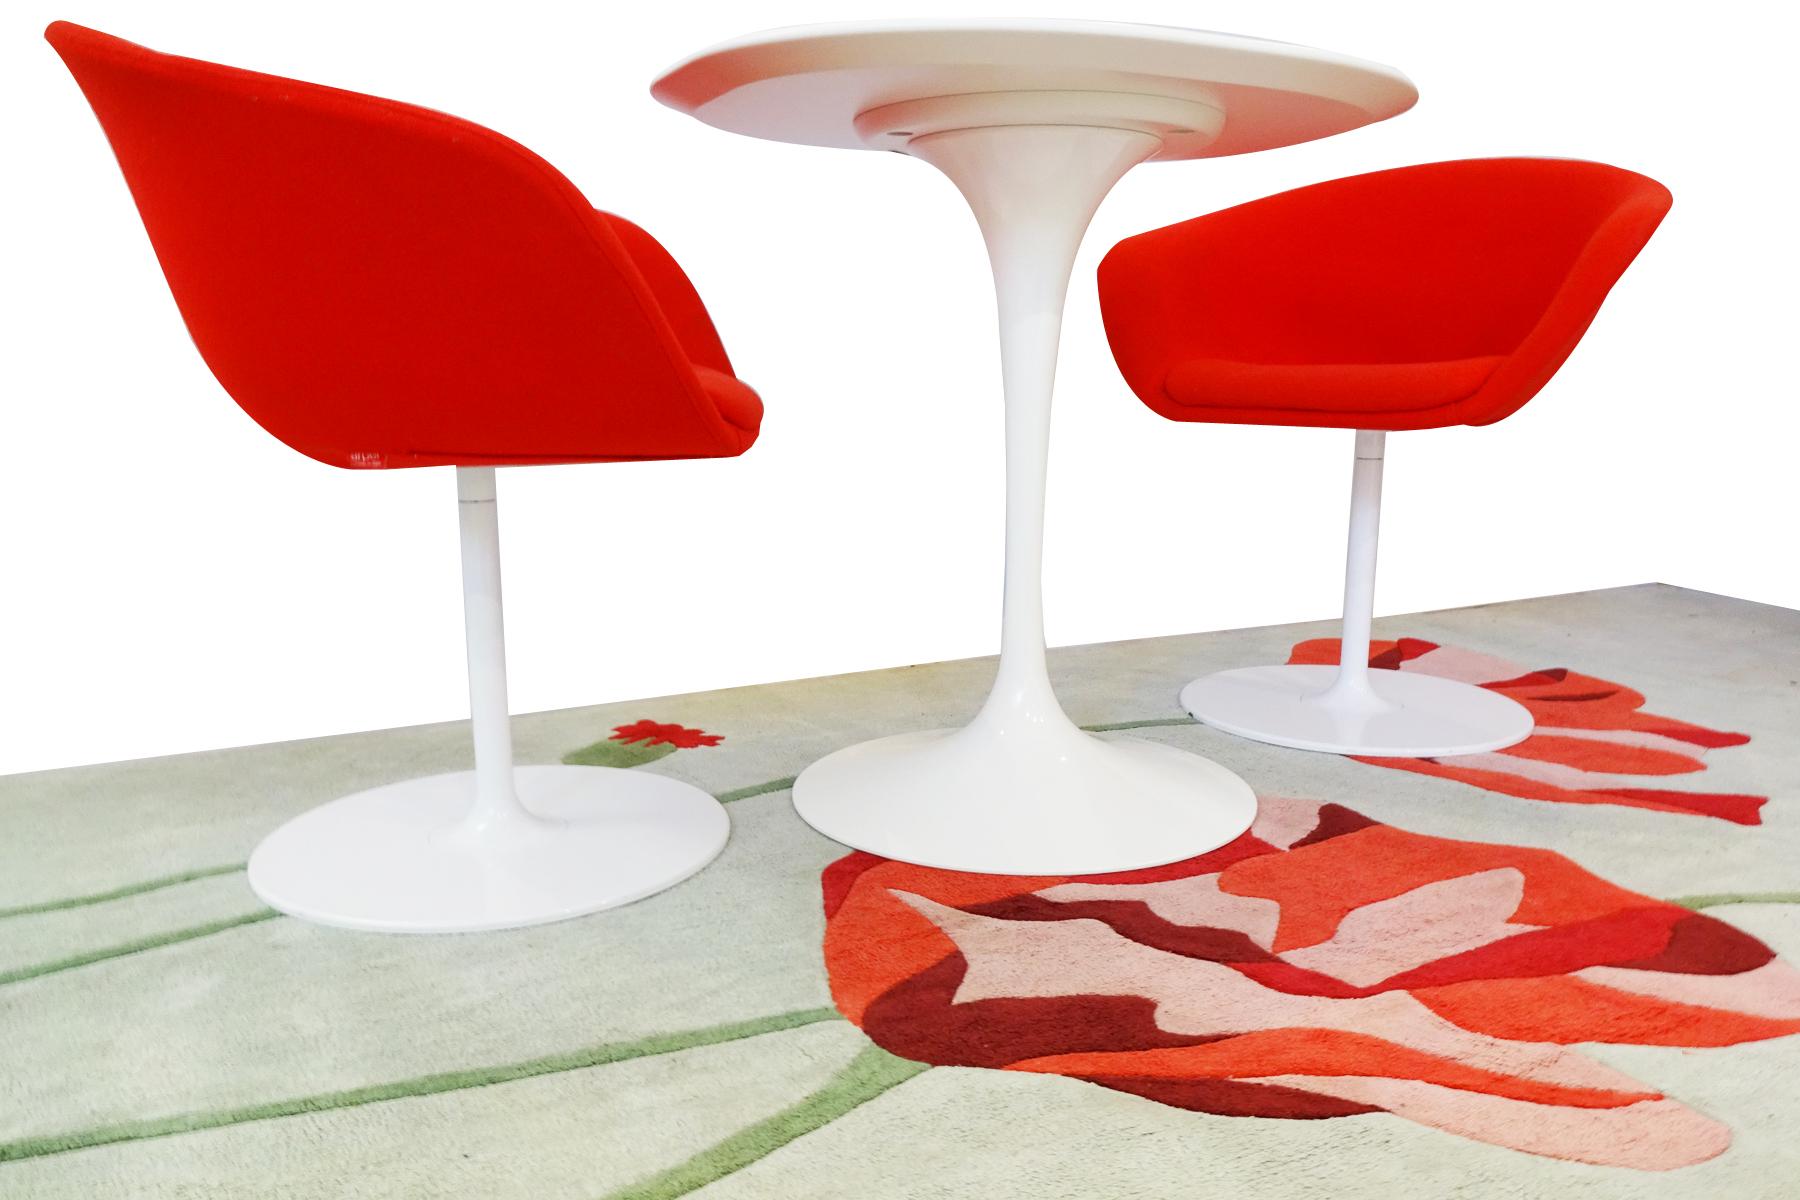 Modern Small Dining Set, Eero Saarinen Knoll Side Table, Arper Chairs and Poppy Rug